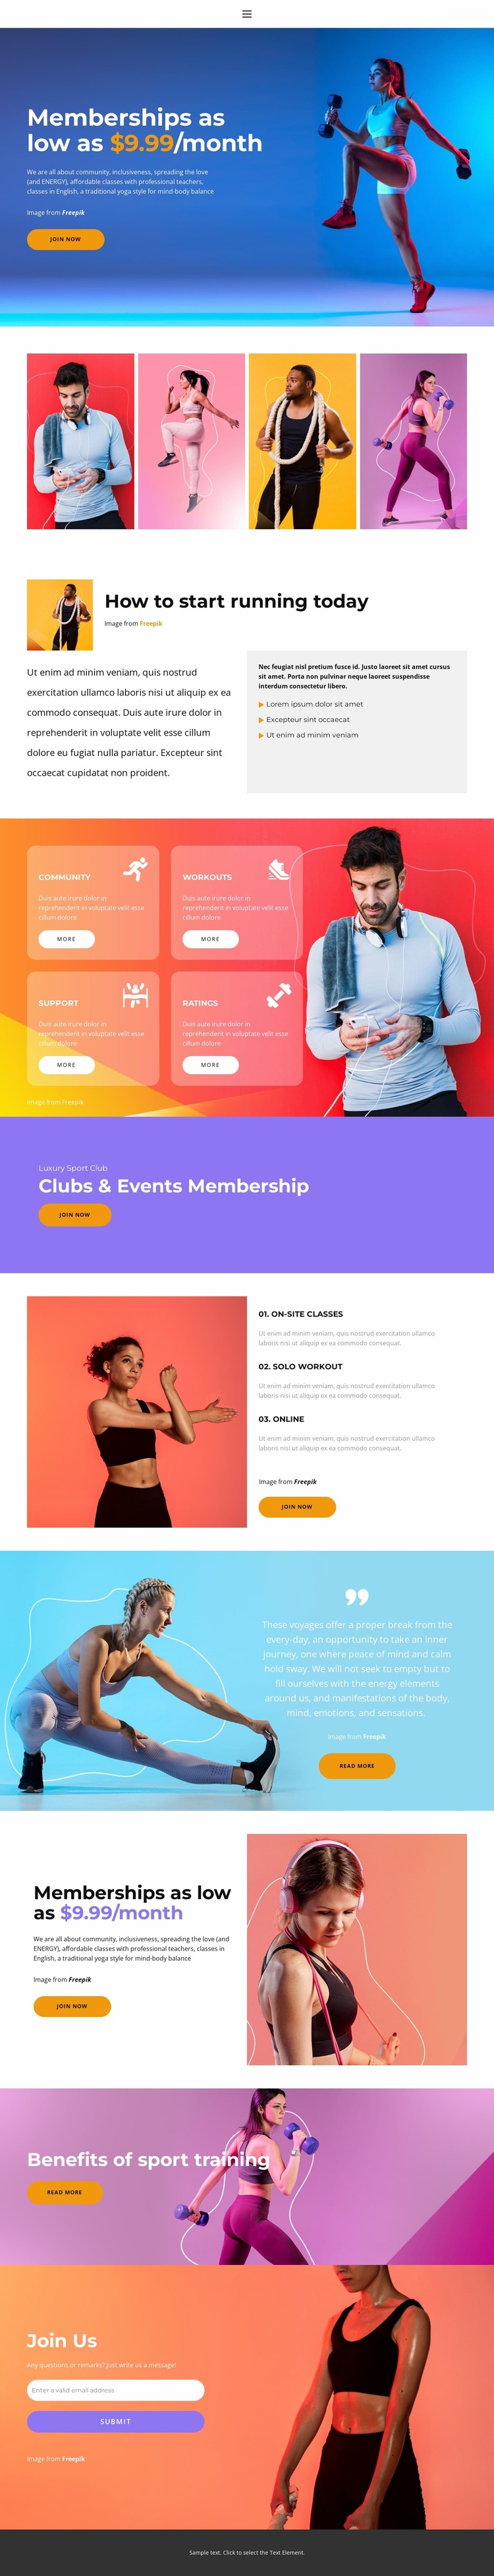 Sports every day Website Design